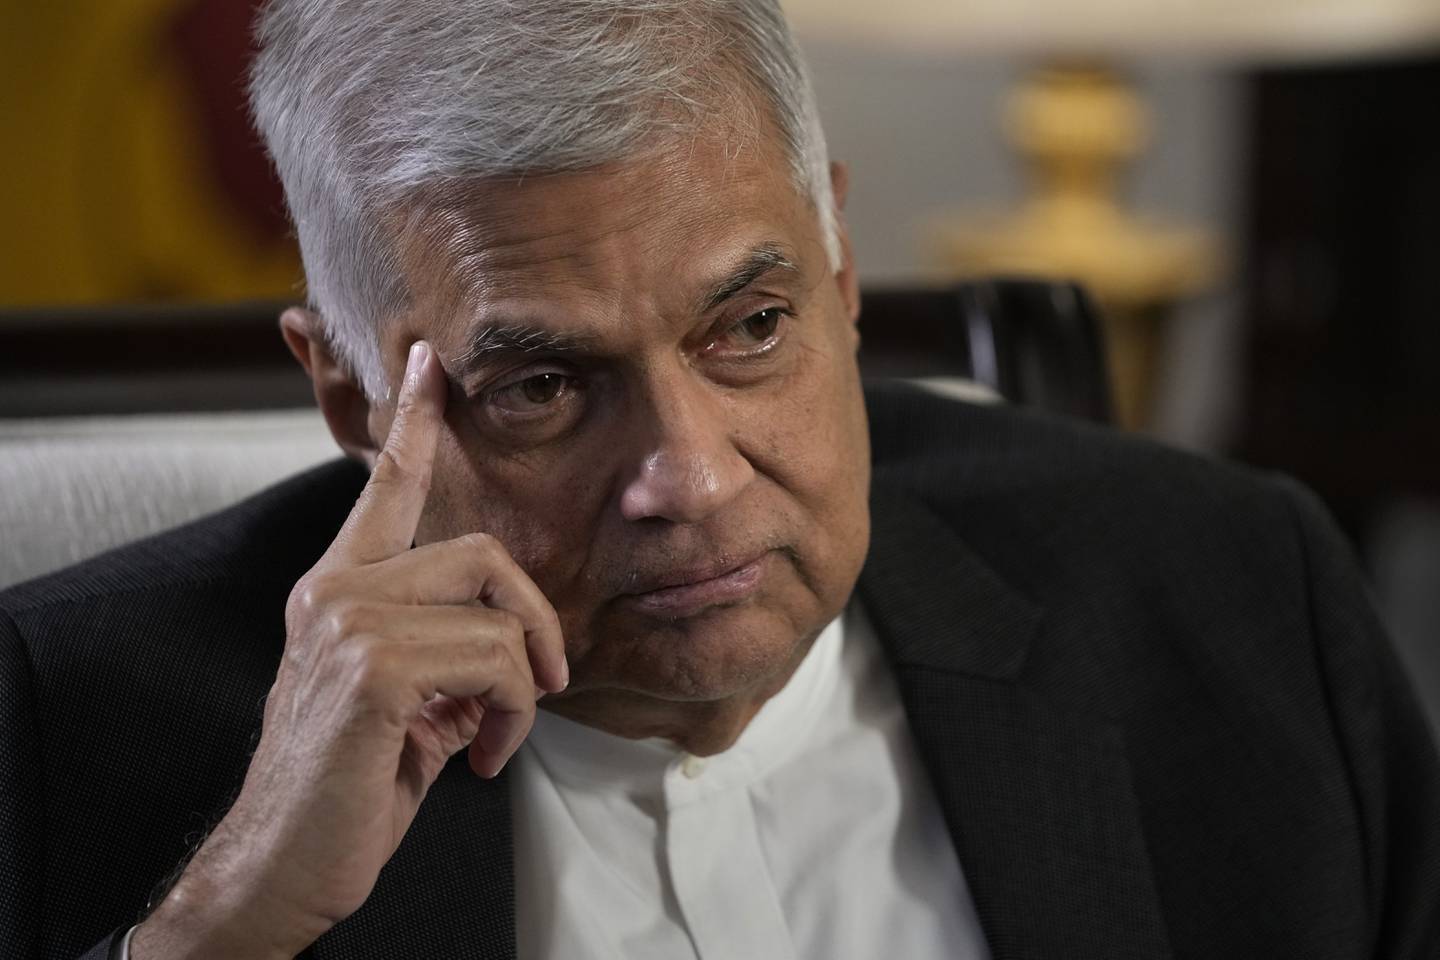 Ranil Wickremesinghe's office was stormed on Wednesday, hours after he was named acting president. AP